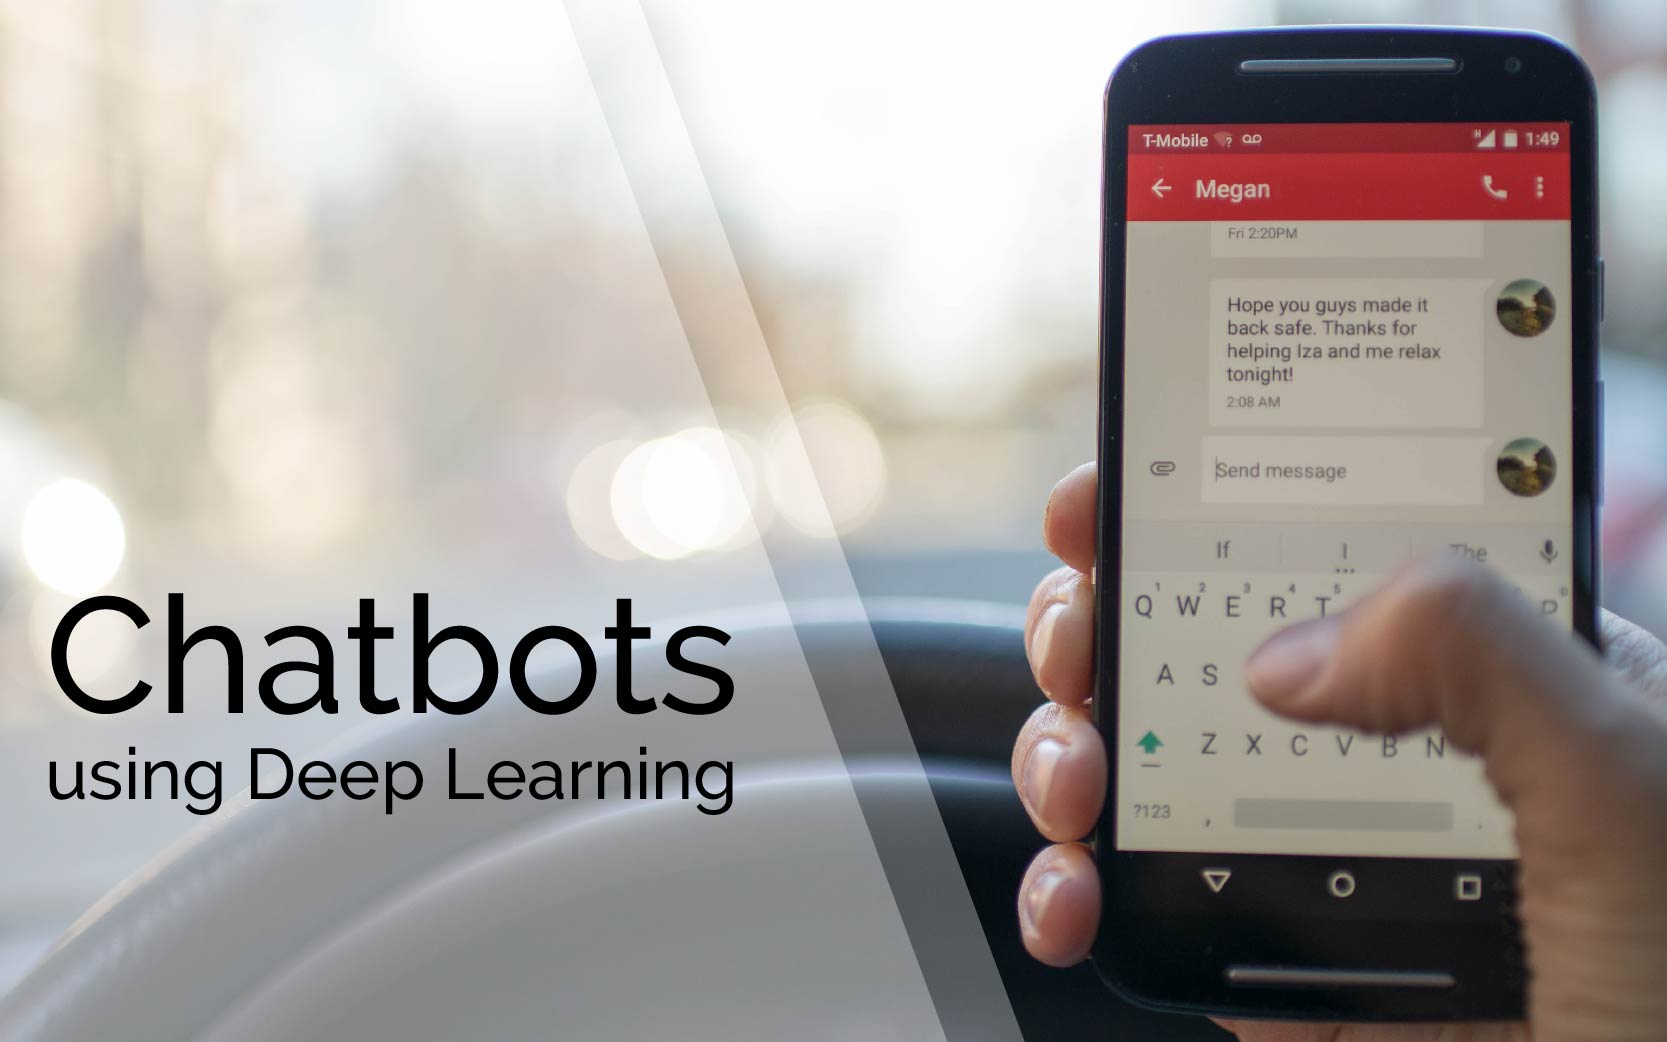 Chatbots using Deep Learning